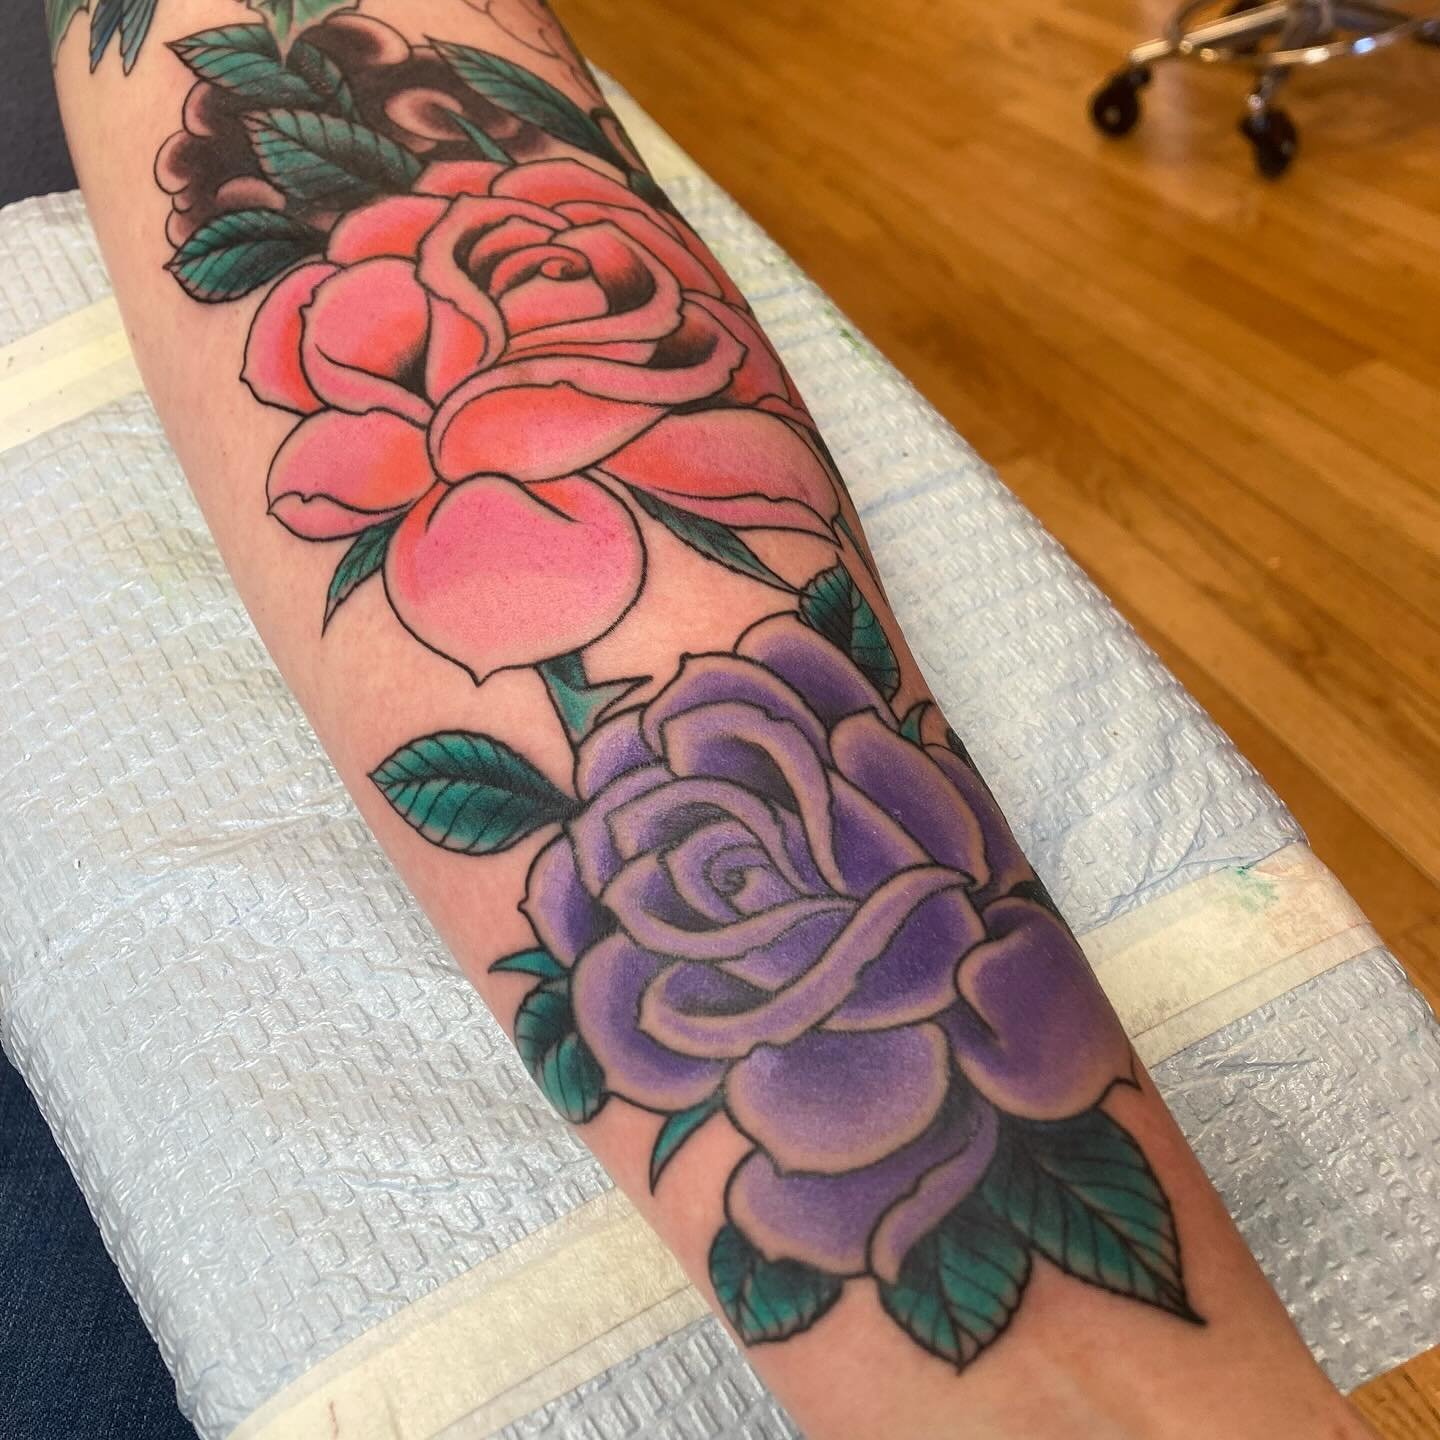 Added these beautiful roses to a bird and flower sleeve we have in progress @namebrandtattoo  Thanks Adriana!  It&rsquo;s always good to see you and Stephane!